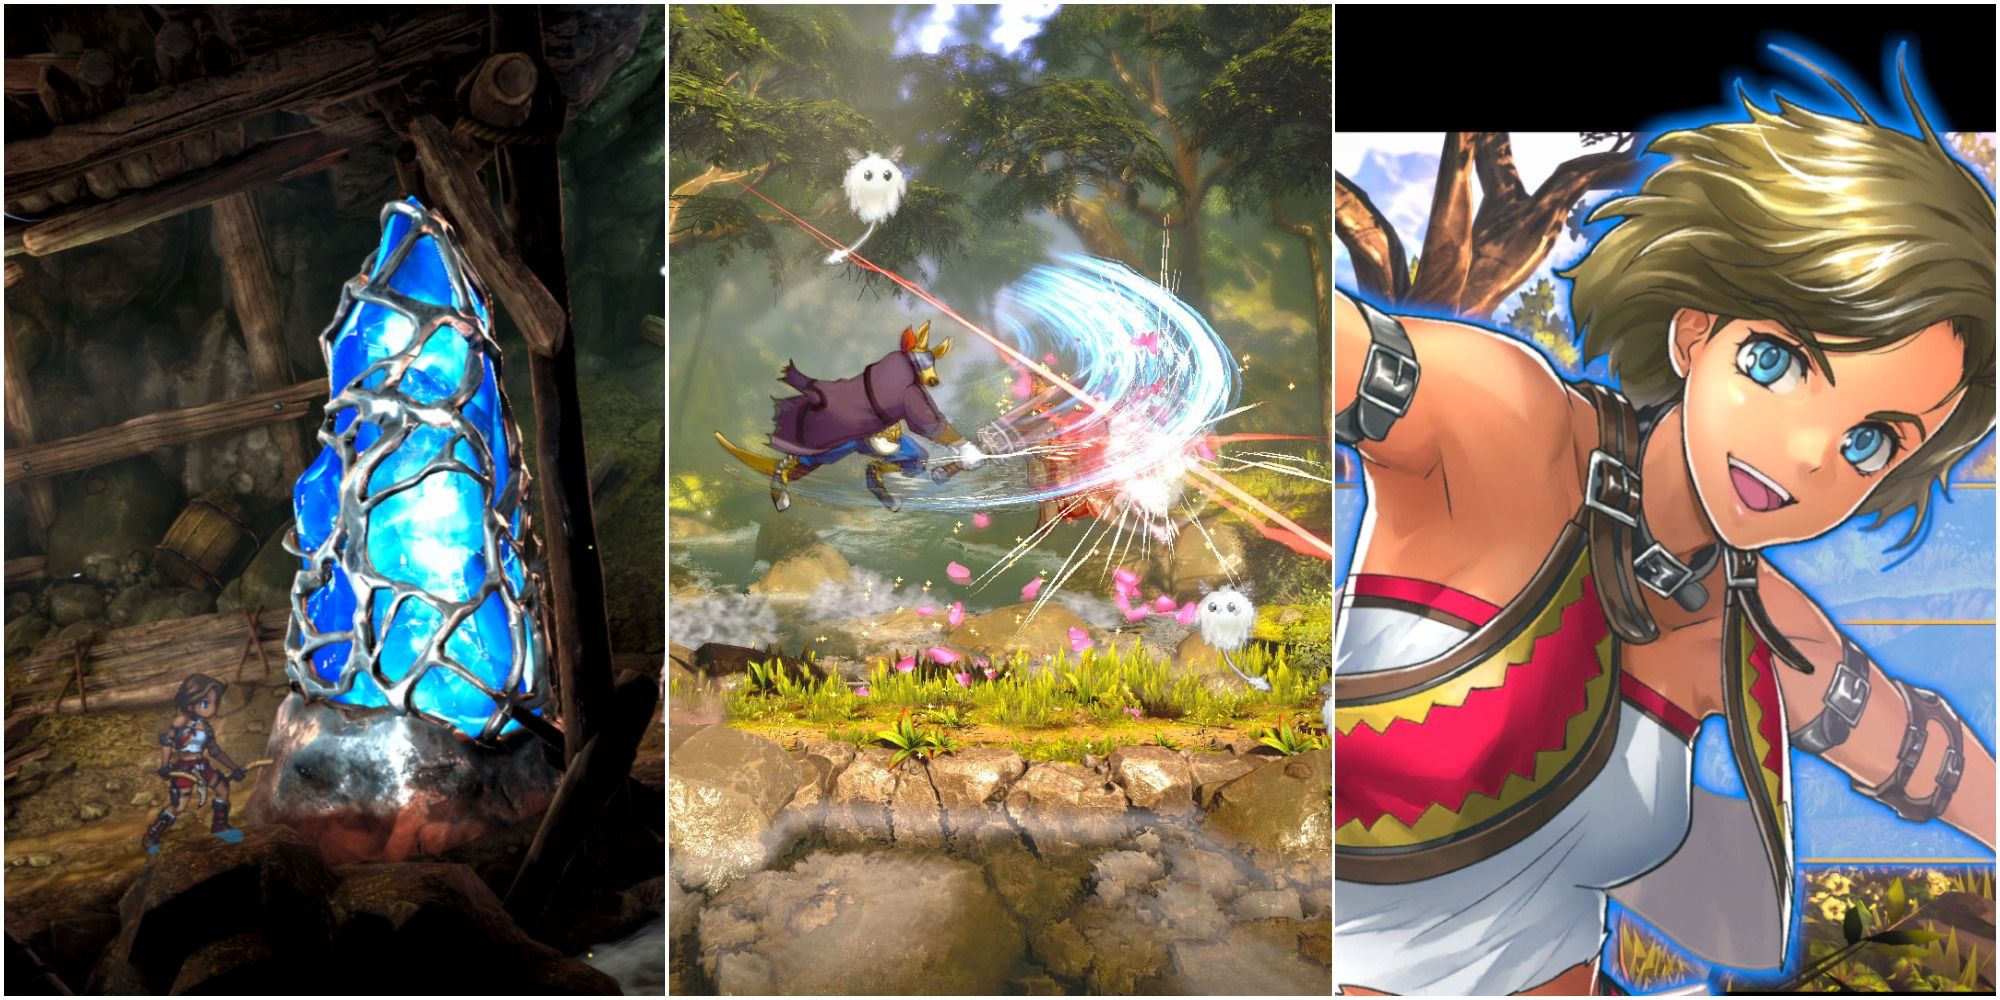 on the left is CJ from Eiyuden Chronicle: Rising next to a large blue boulder, in the middle is Garoo fighting enemies and on the right is a portrait of CJ